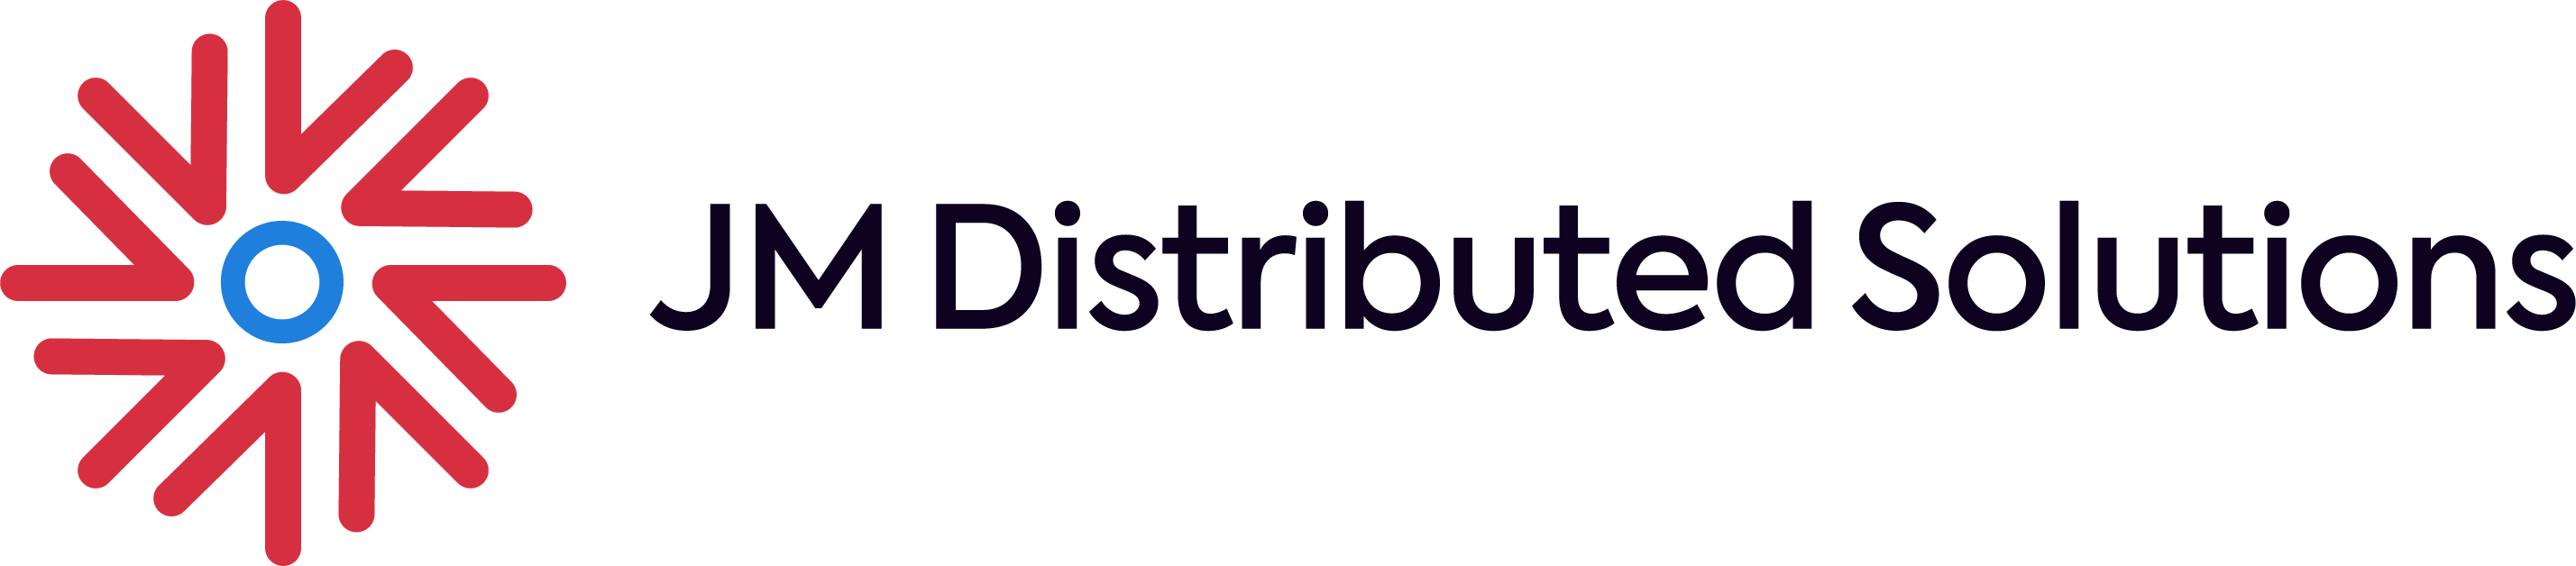 JM Distributed Solutions